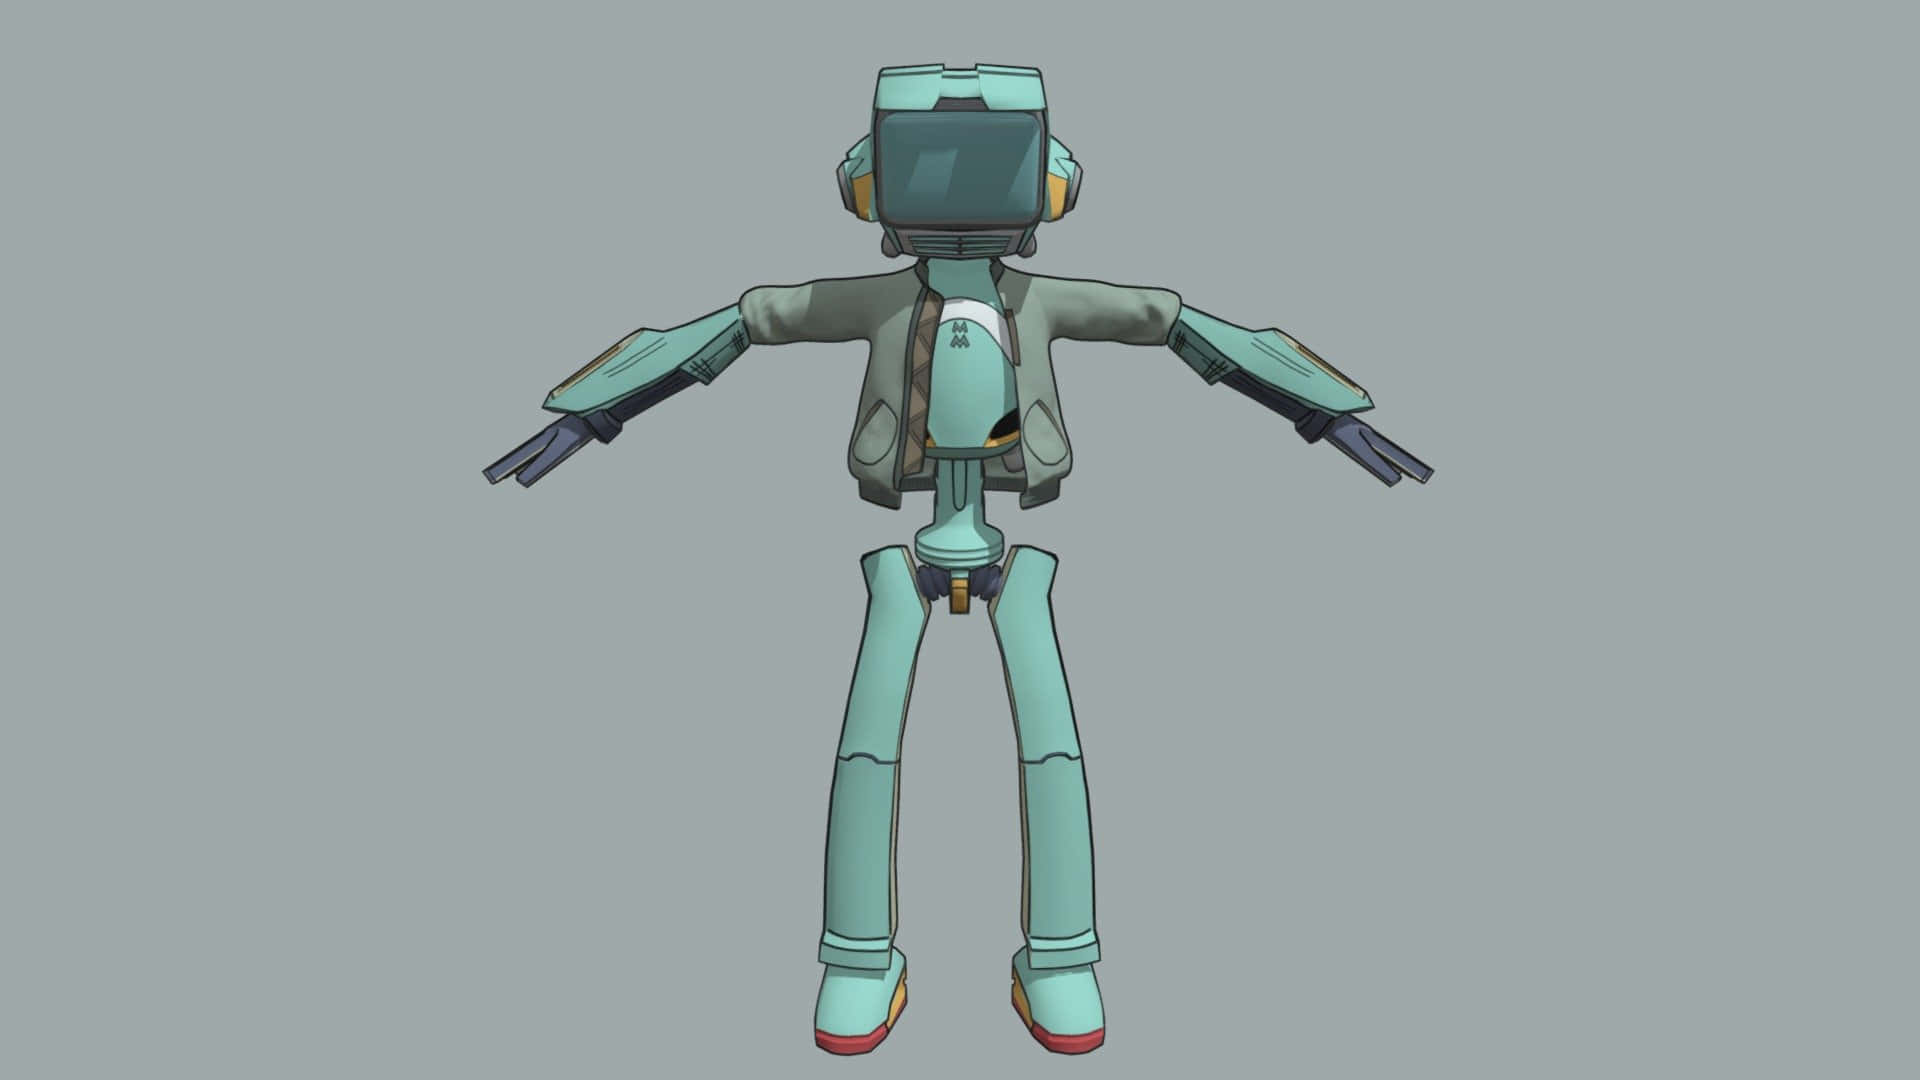 Canti from FLCL in a Colorful 1920x1080 Wallpaper Wallpaper